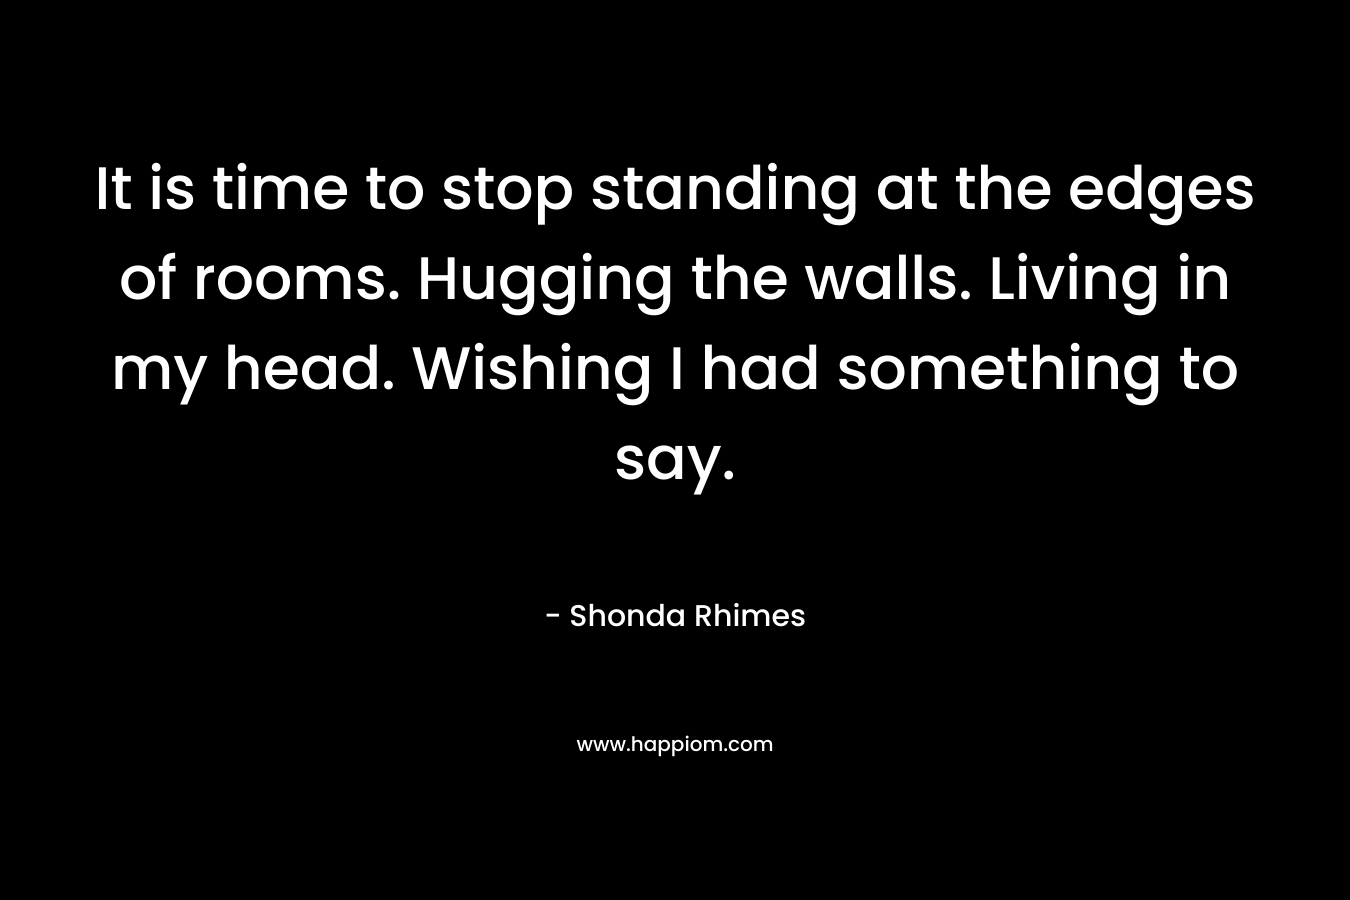 It is time to stop standing at the edges of rooms. Hugging the walls. Living in my head. Wishing I had something to say.